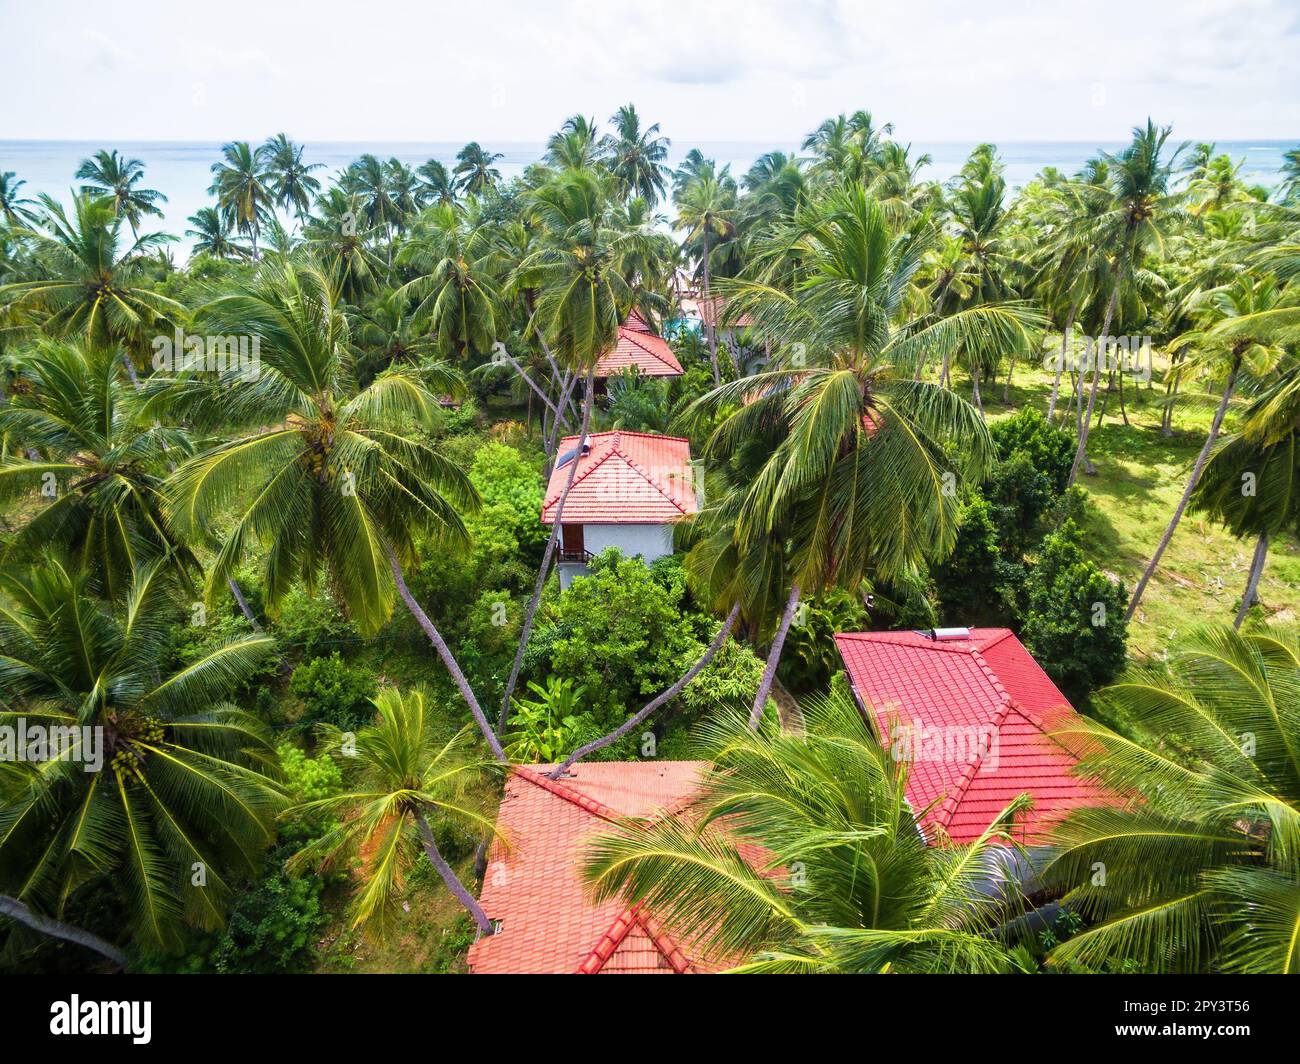 Coconut palm trees and hotel houses on ocean beach, Sri Lanka. Aerial view of scenic resort or village, landscape of seashore in jungle. Travel, vacat Stock Photo